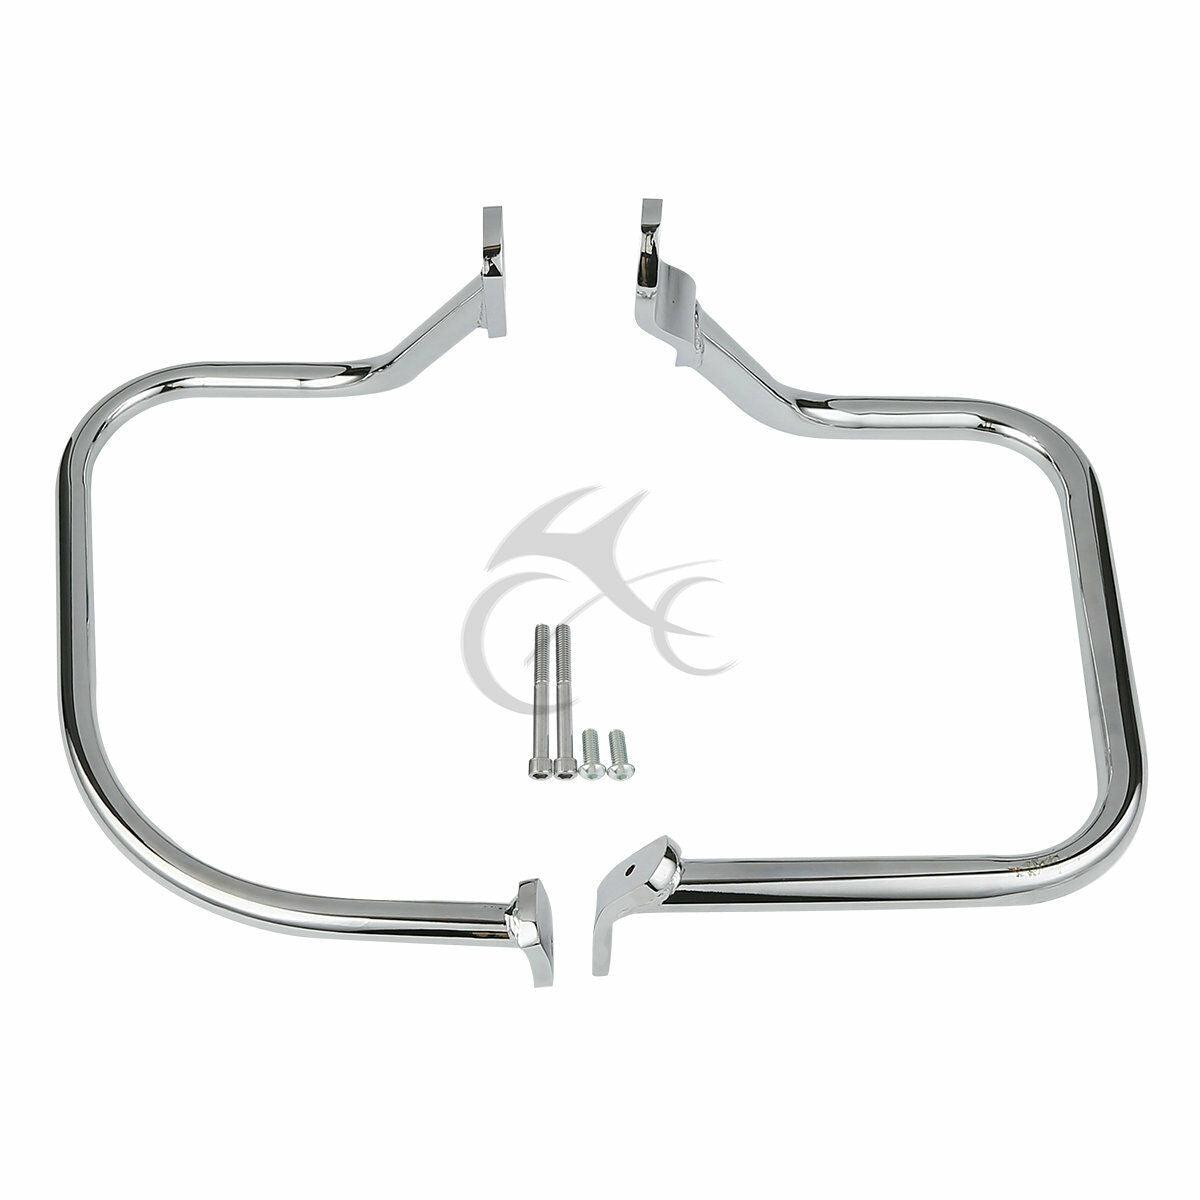 Chrome Left&Right Rear Saddlebags Guard Rail For Harley Softail FLST FLSTC 00-17 - Moto Life Products